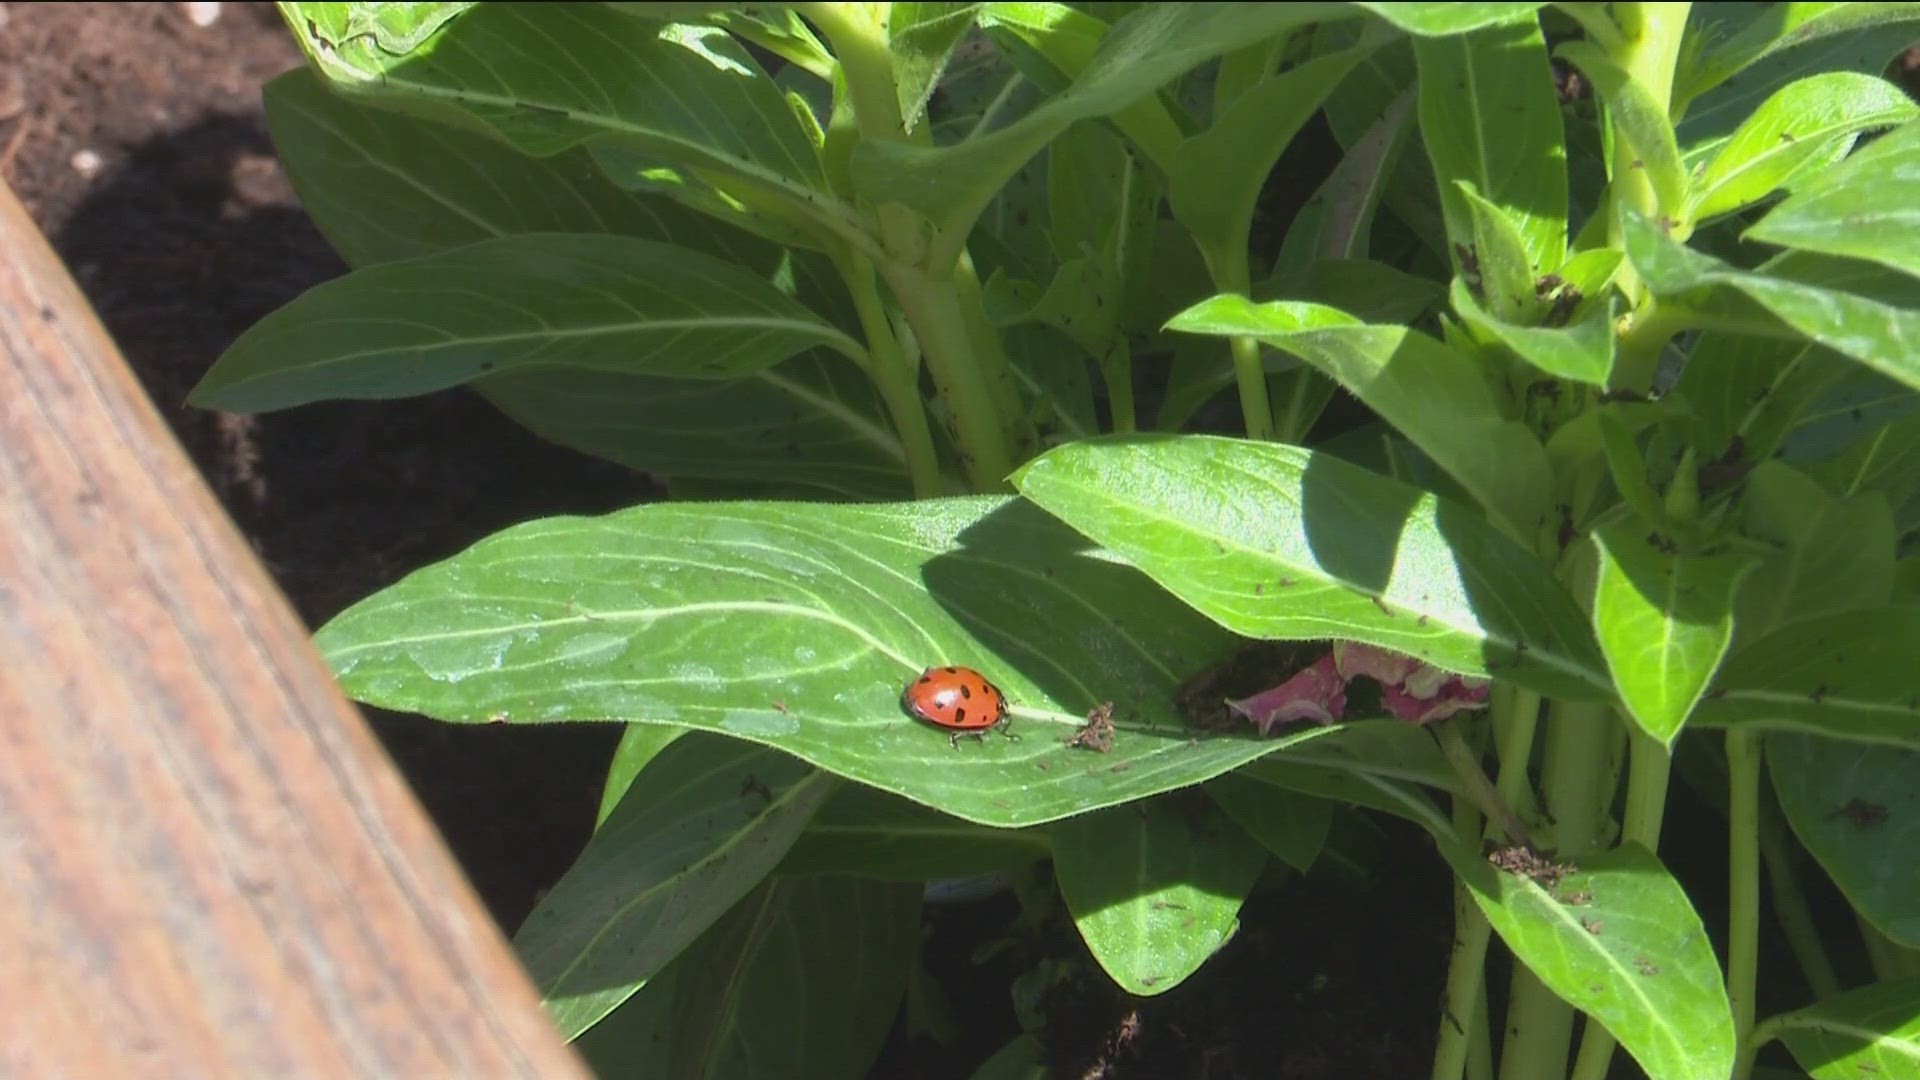 Some could say the students got lucky as they had the opportunity to release 3,000 ladybugs into nearby gardens and trees outside their schoolyard.